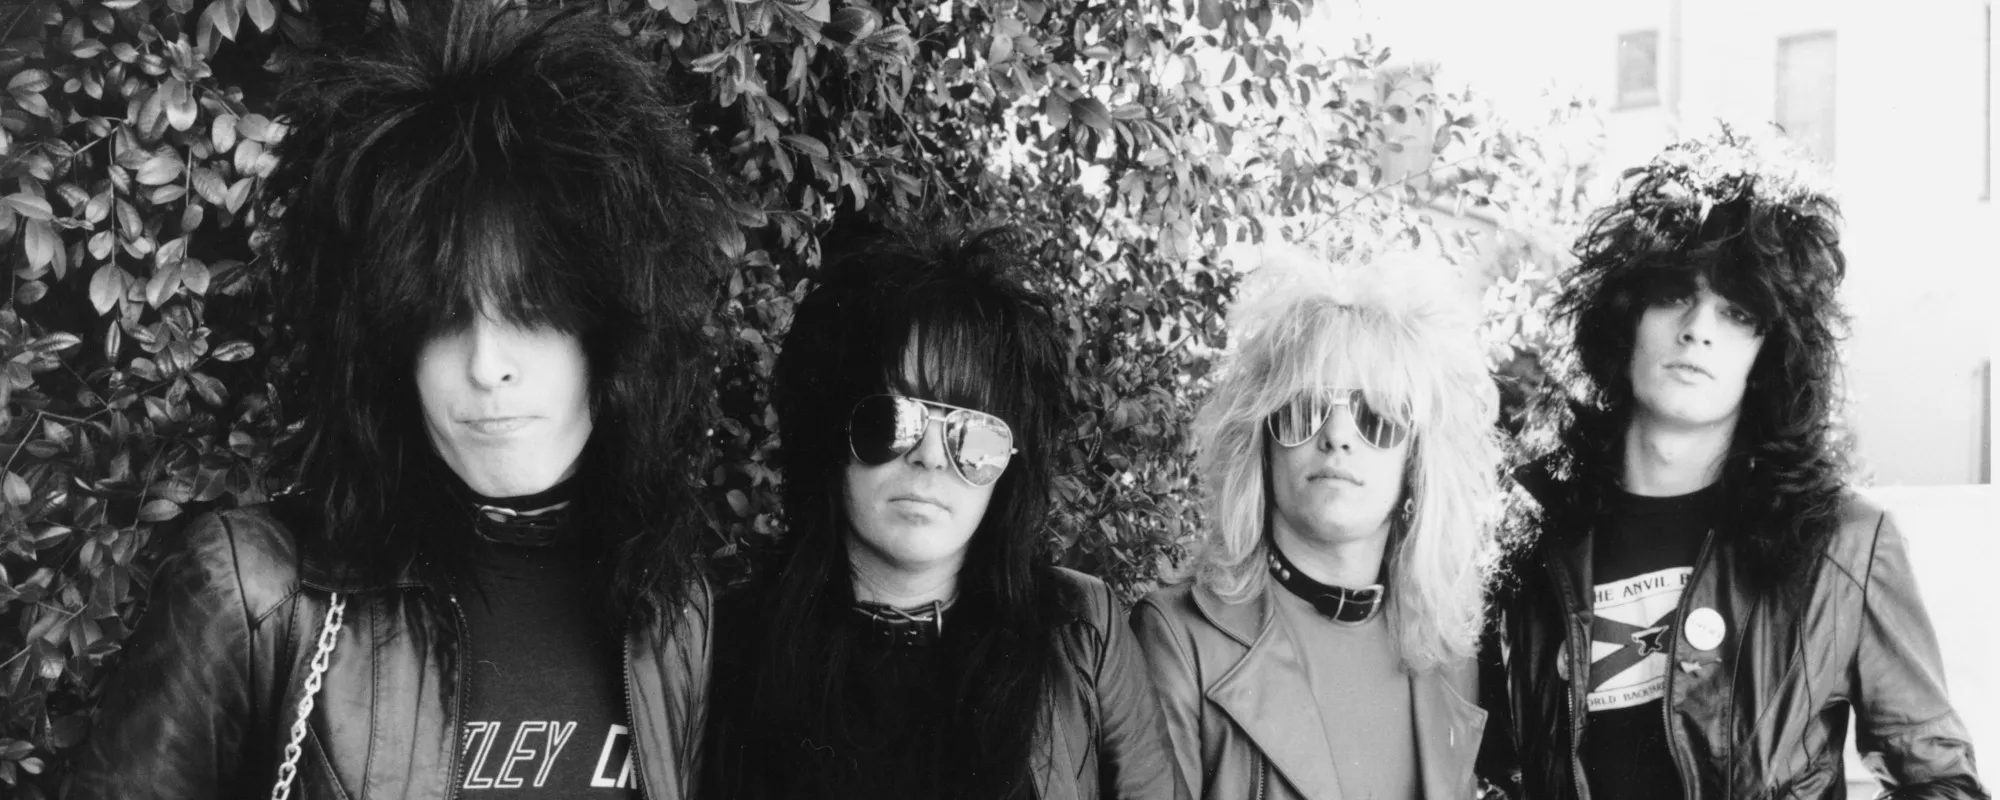 The Lonesome Meaning Behind Mötley Crüe’s 1985 Power Ballad “Home Sweet Home”